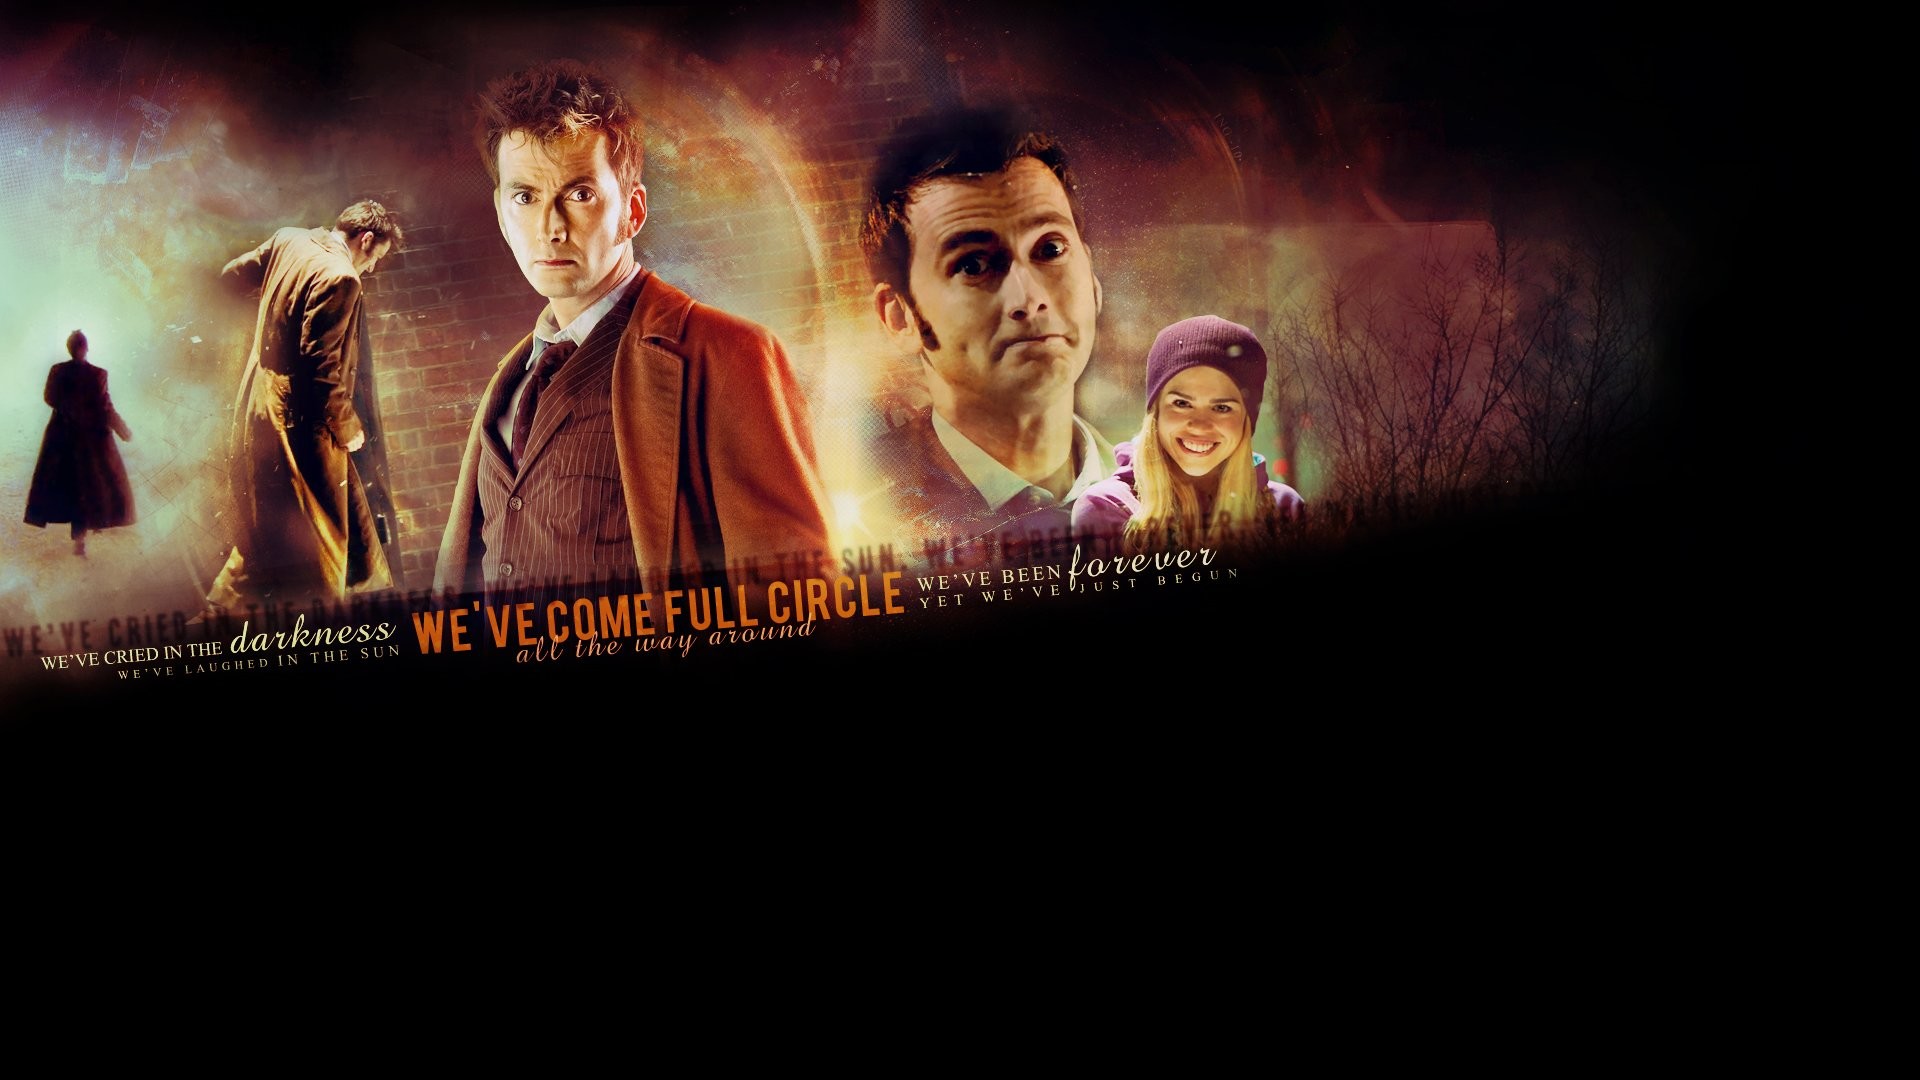 1920x1080 Text Rose Tyler David Tennant typography Billie Piper Doctor Who Tenth  Doctor wallpaper |  | 293632 | WallpaperUP